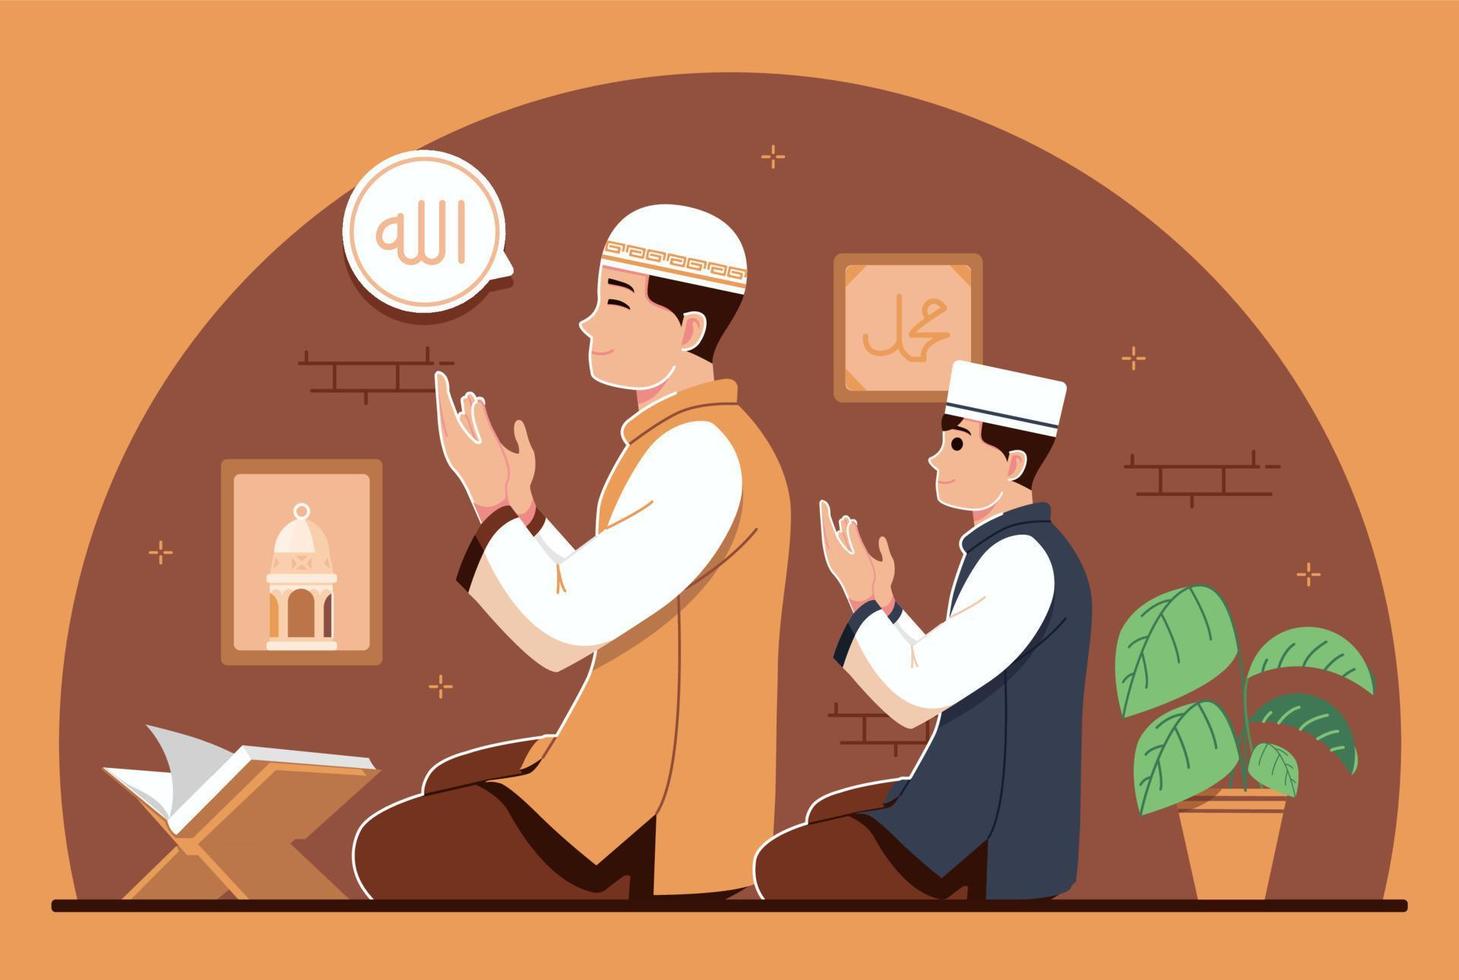 Islamic family praying together illustration vector